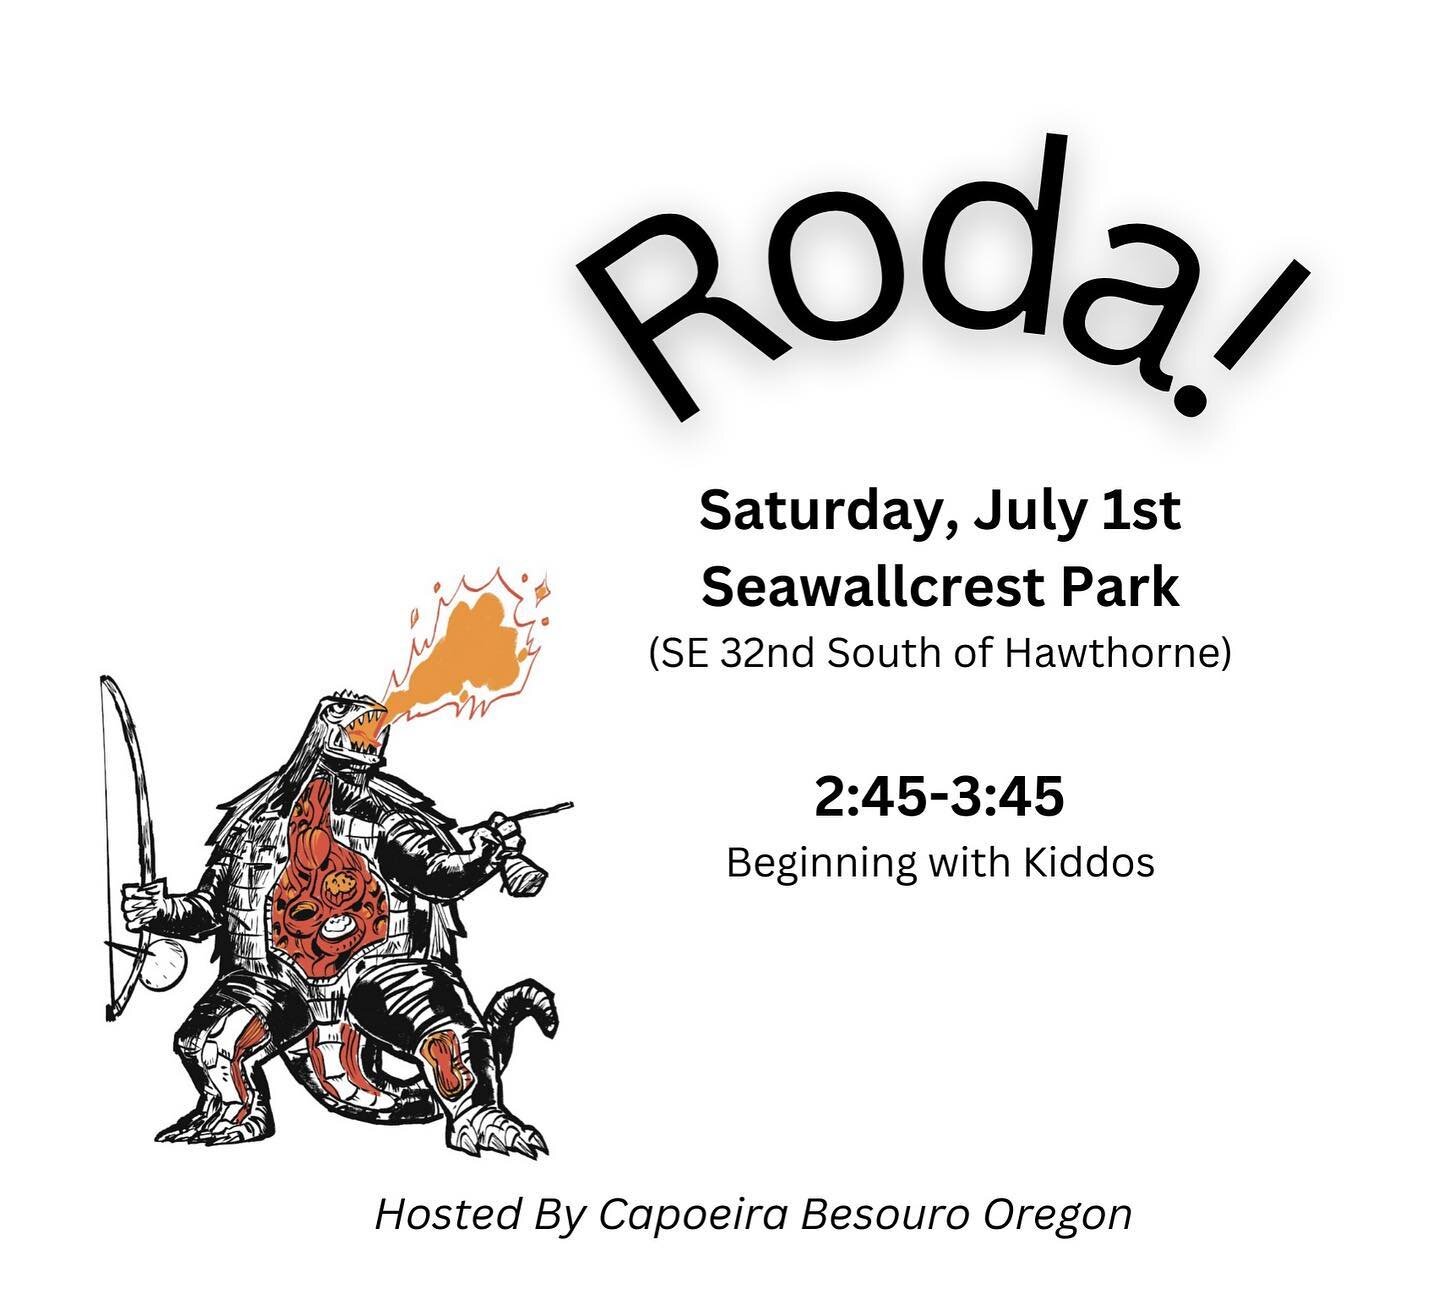 Come join us for a  seawallcrest park Roda this Saturday 2:45! Bringing children is encouraged.
(SE 32nd, just south of Hawthorne)
#kidscapoeira #oregoncapoeira #portlandcapoeira #capoeirabesouro